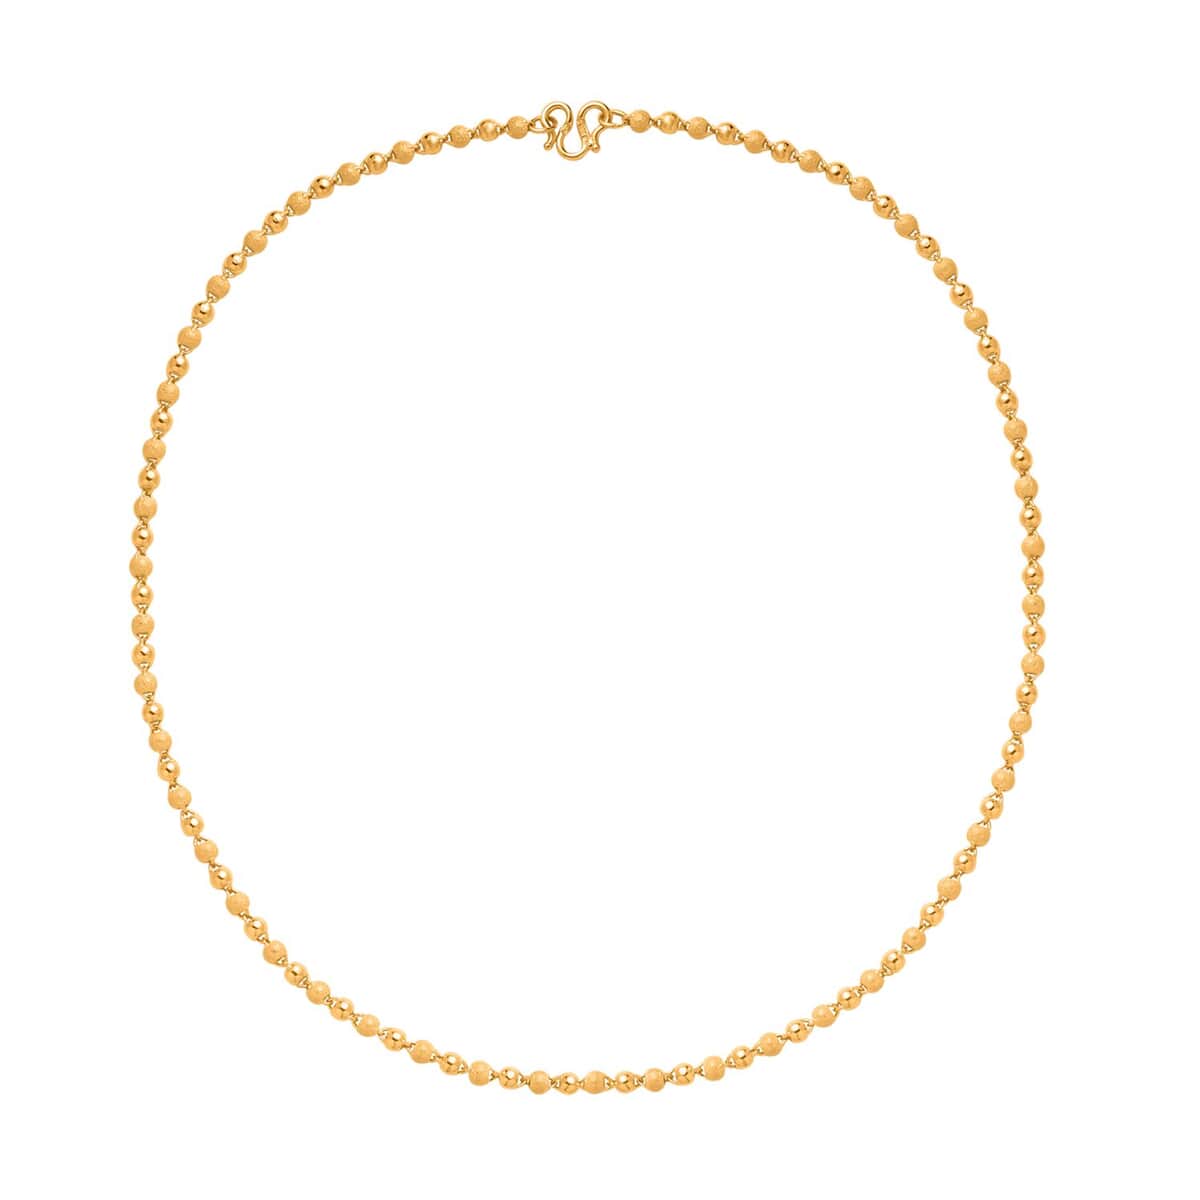 Ankur Treasure Chest 24K Yellow Gold Electroform 4mm Textured Beaded Necklace 18 Inches 14.65 Grams image number 0